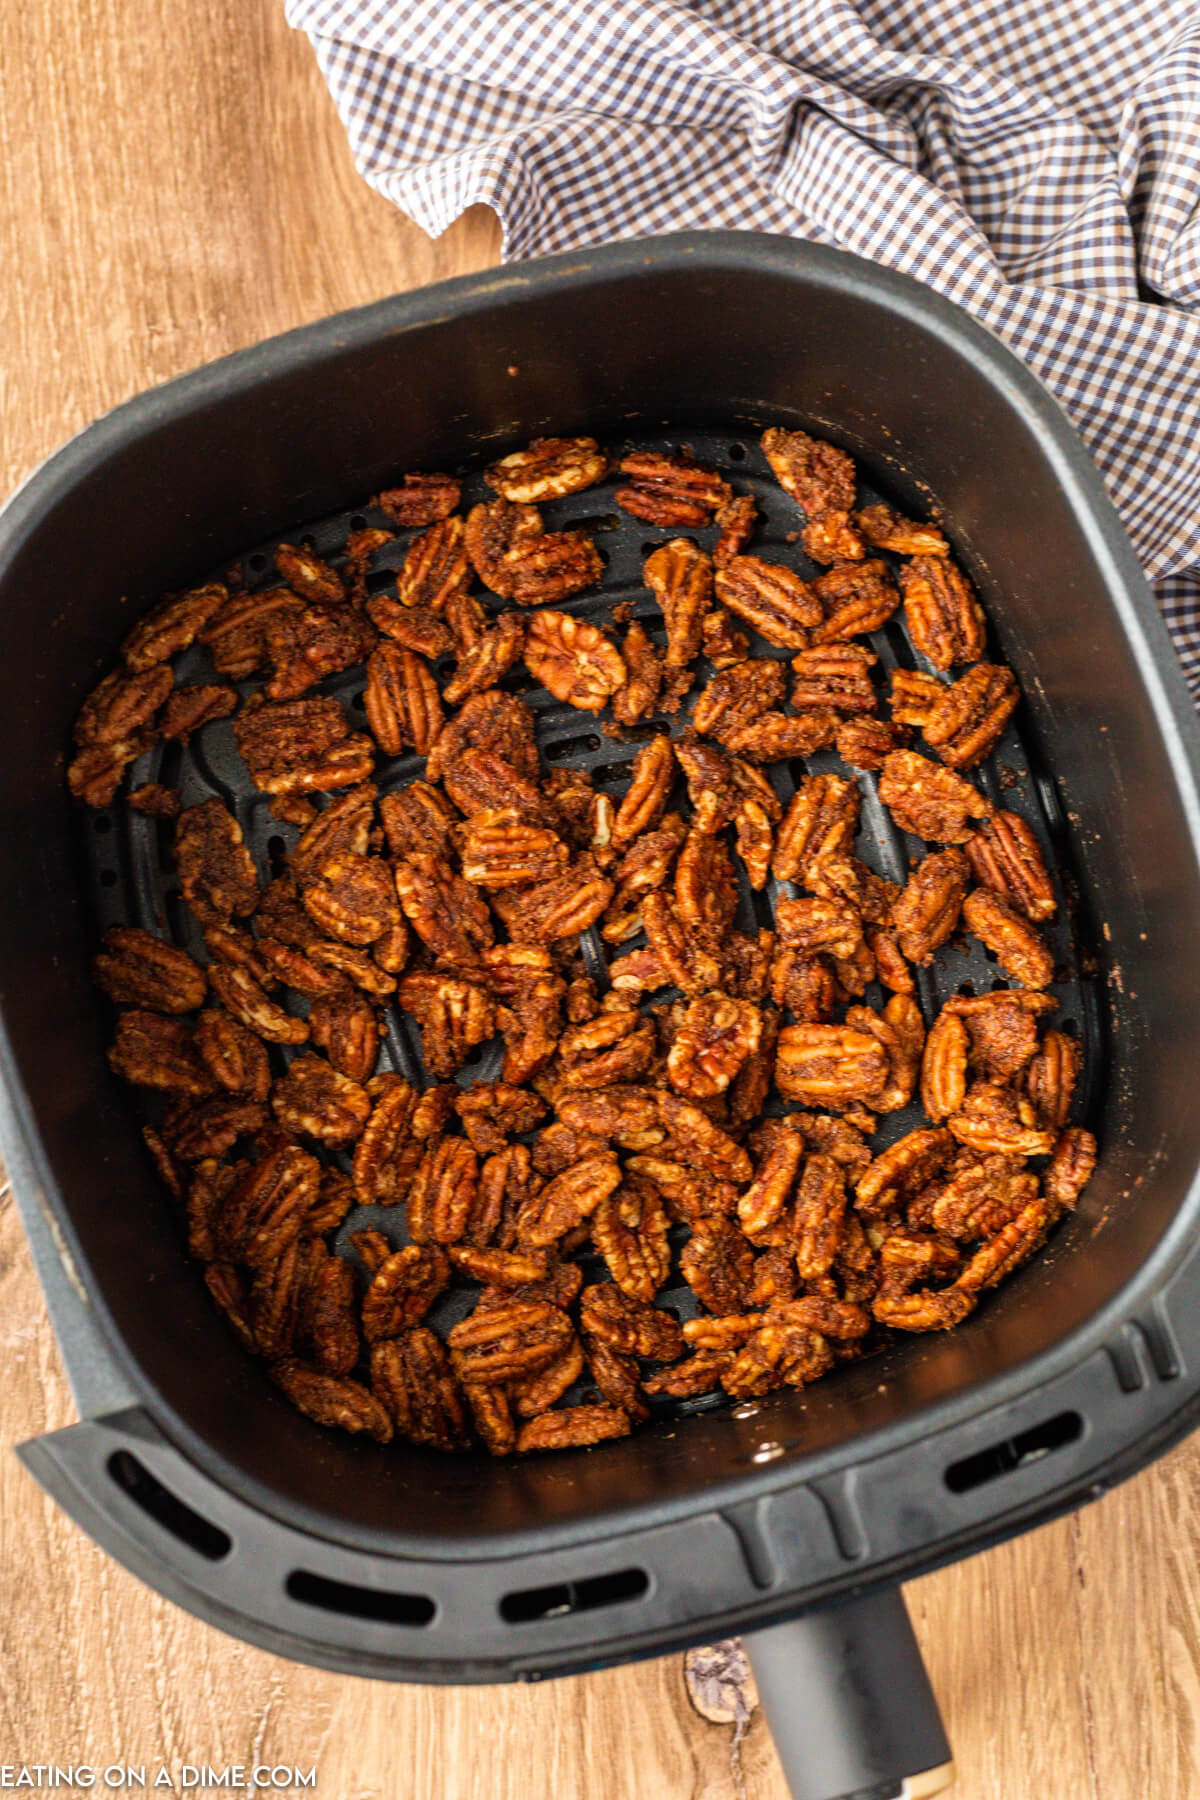 Candied pecans in the air fryer 